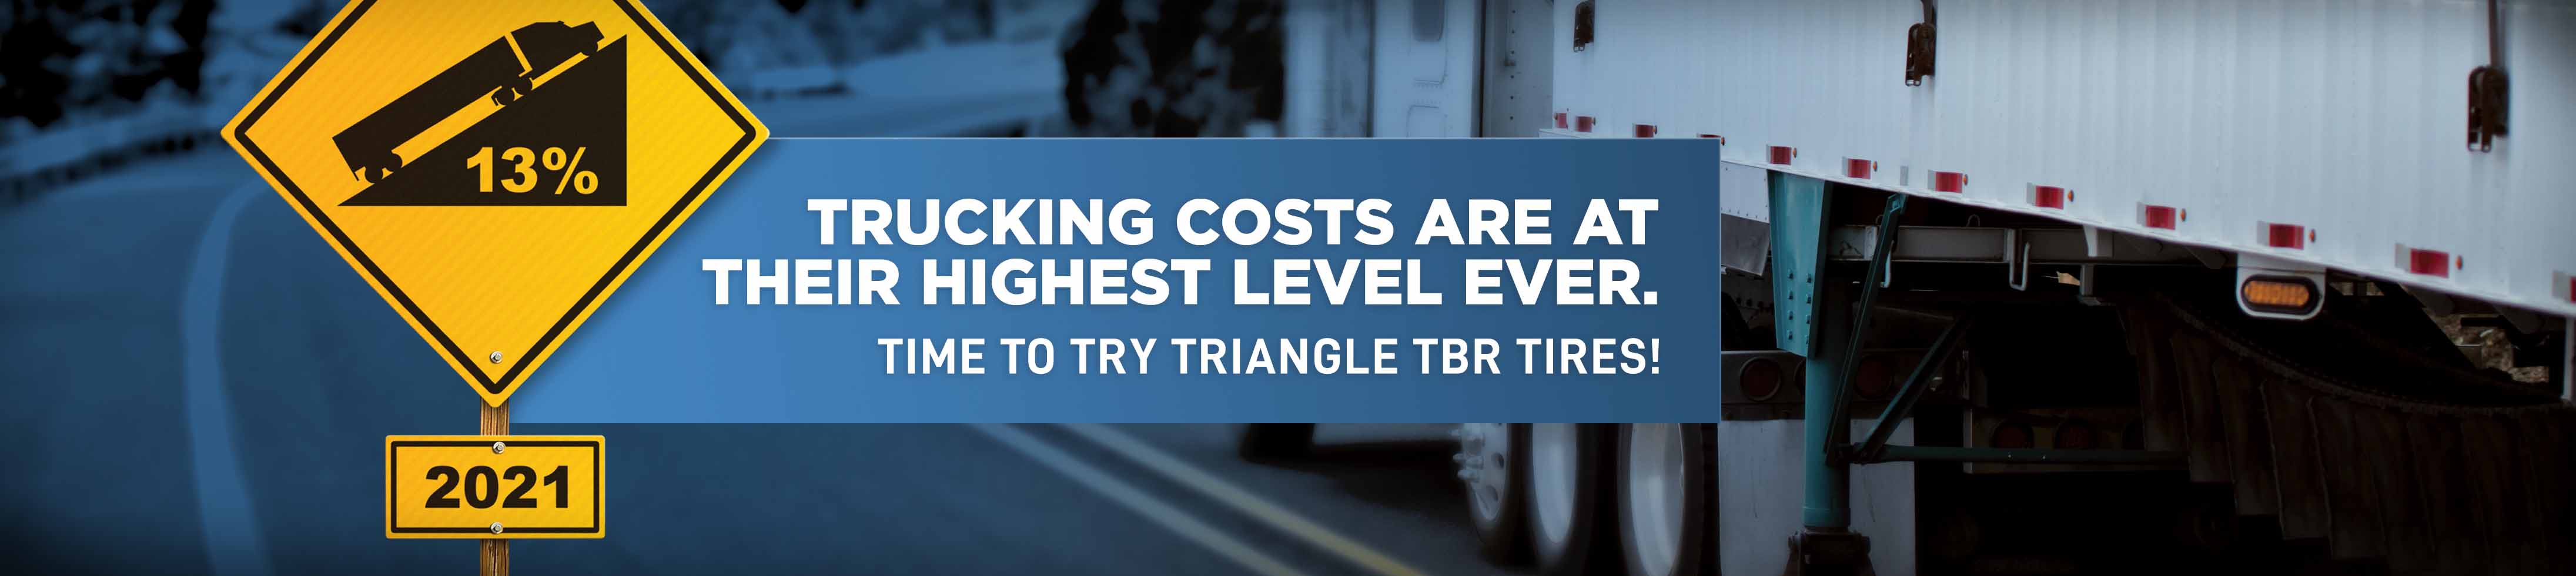 Trucking Costs